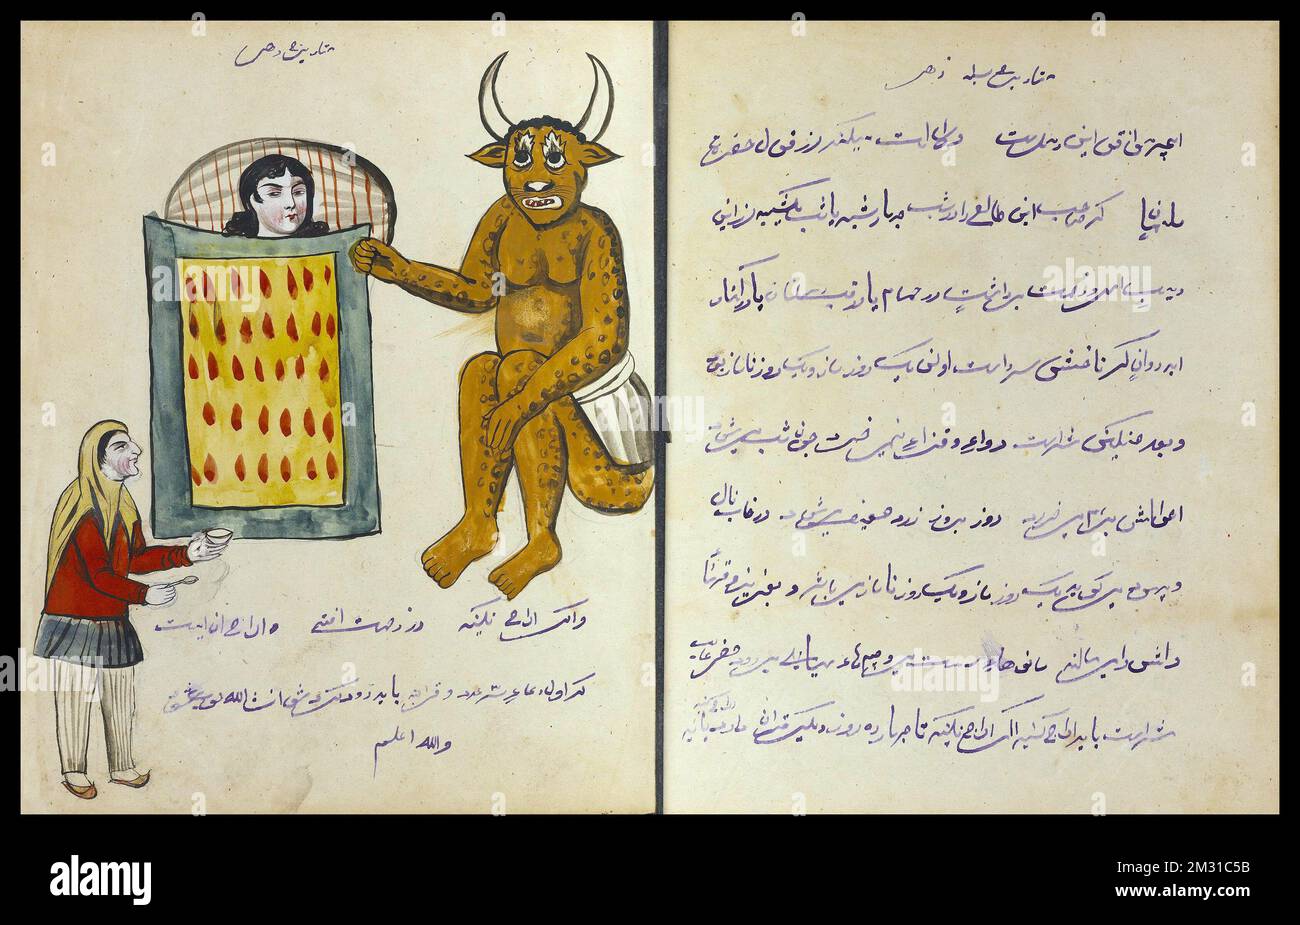 Pages from a 1921 Persian painted manuscript on magic and astrology, including a book of spells describing incantation and talismans. Watercolour illustrations depicting the signs of the Zodiac, demons linked to these signs, constellations, the birth of stars, and archangels such as Mik???l and Jibr???l. Isfhan, Iran. Manuscript entitled: Kitāb-i ʻAjāʾib-i makhlūqāt. Stock Photo